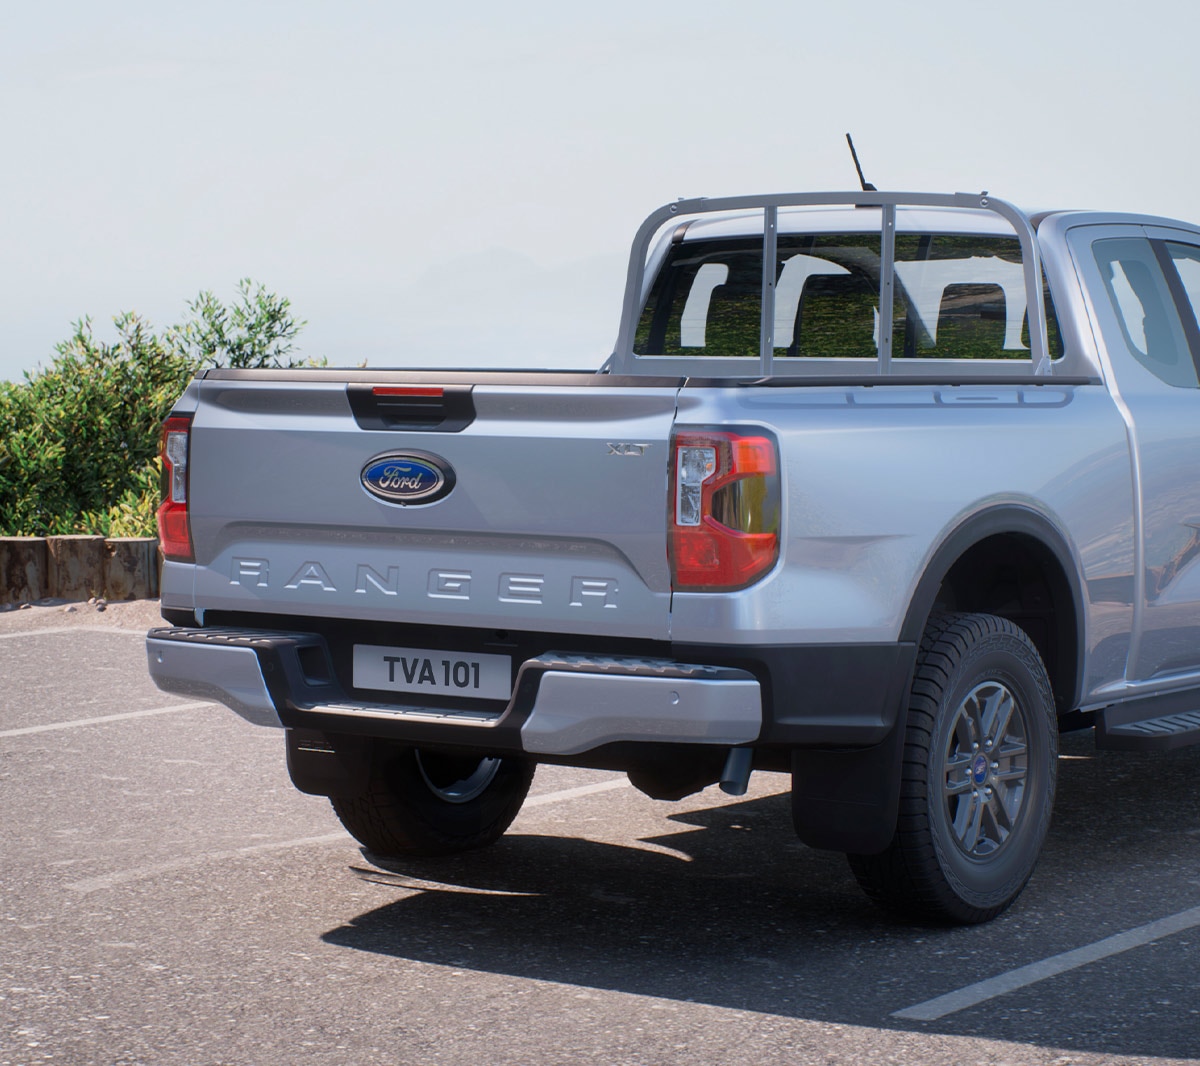 All-New Ford Ranger in Moondust Silver rear 3/4 view